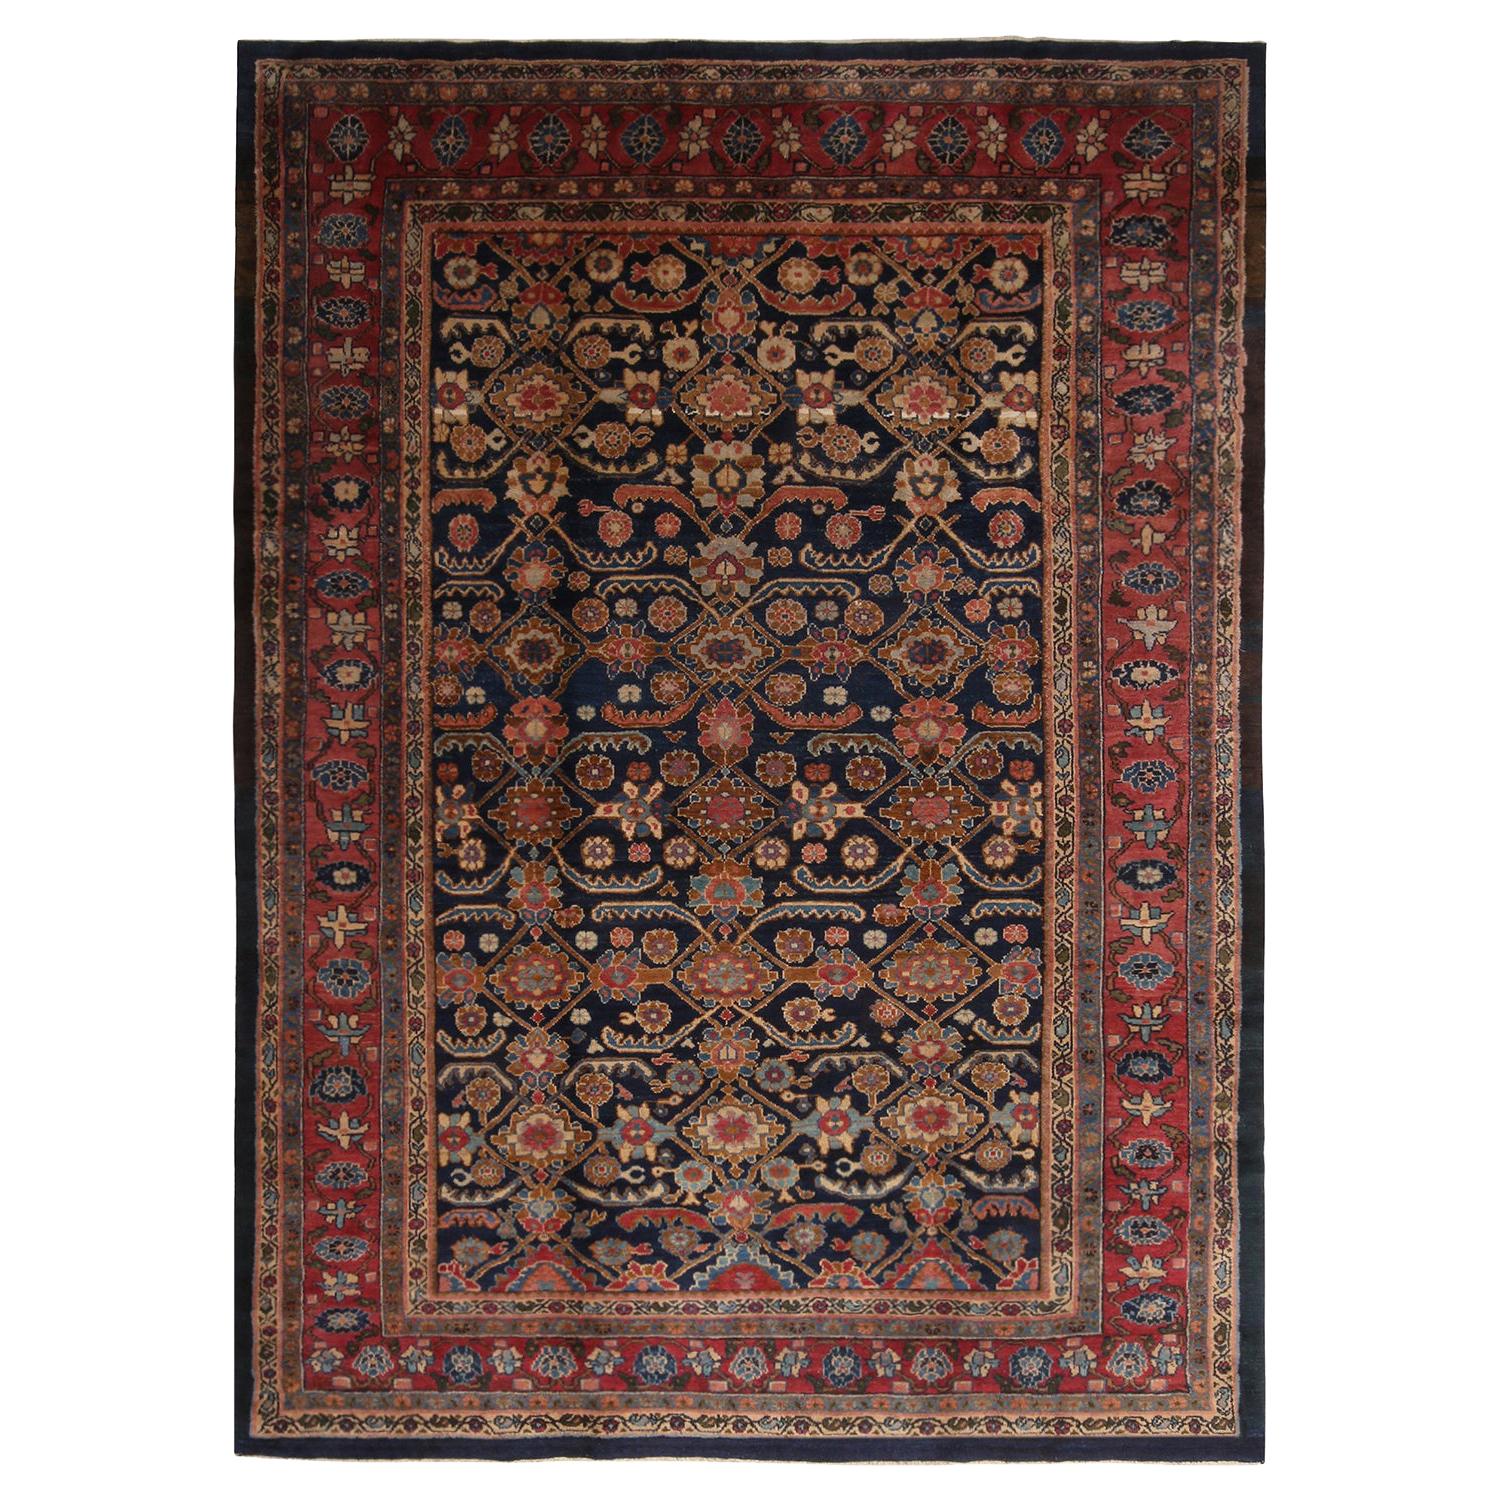 Antique Hamadan Geometric-Floral Red and Navy Blue Wool Persian Rug